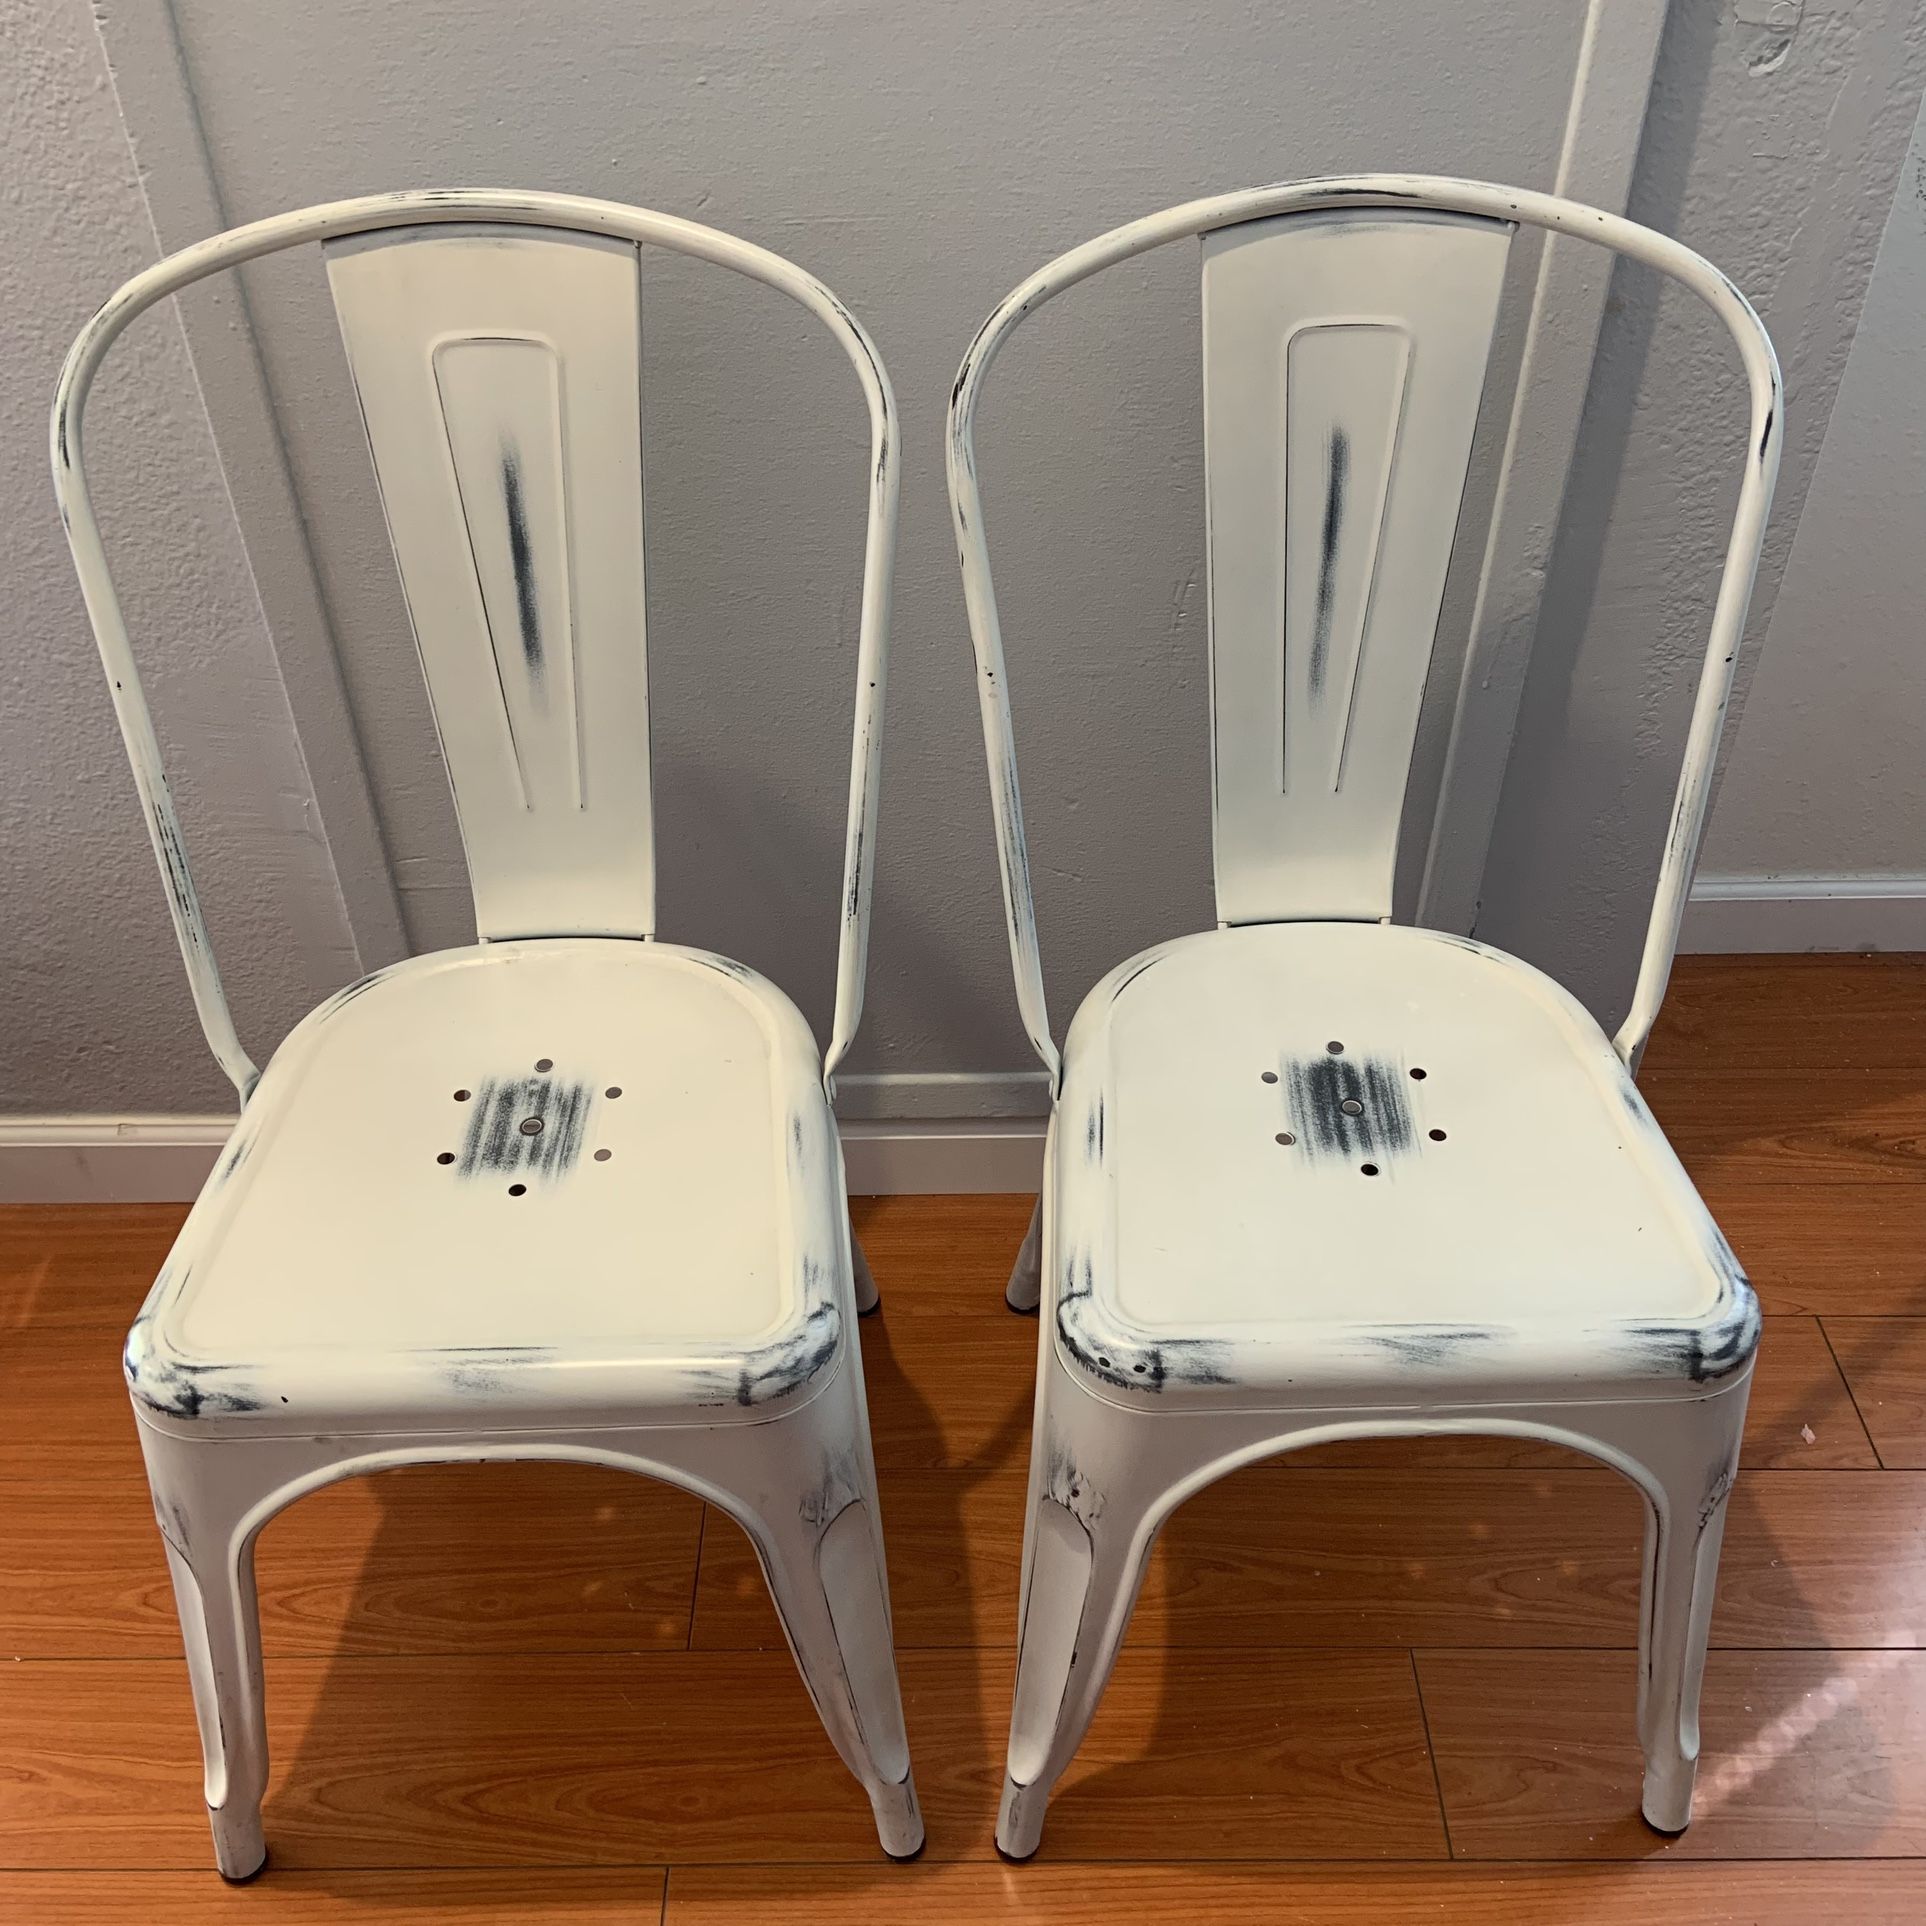 Distressed White Metal Kitchen Chairs